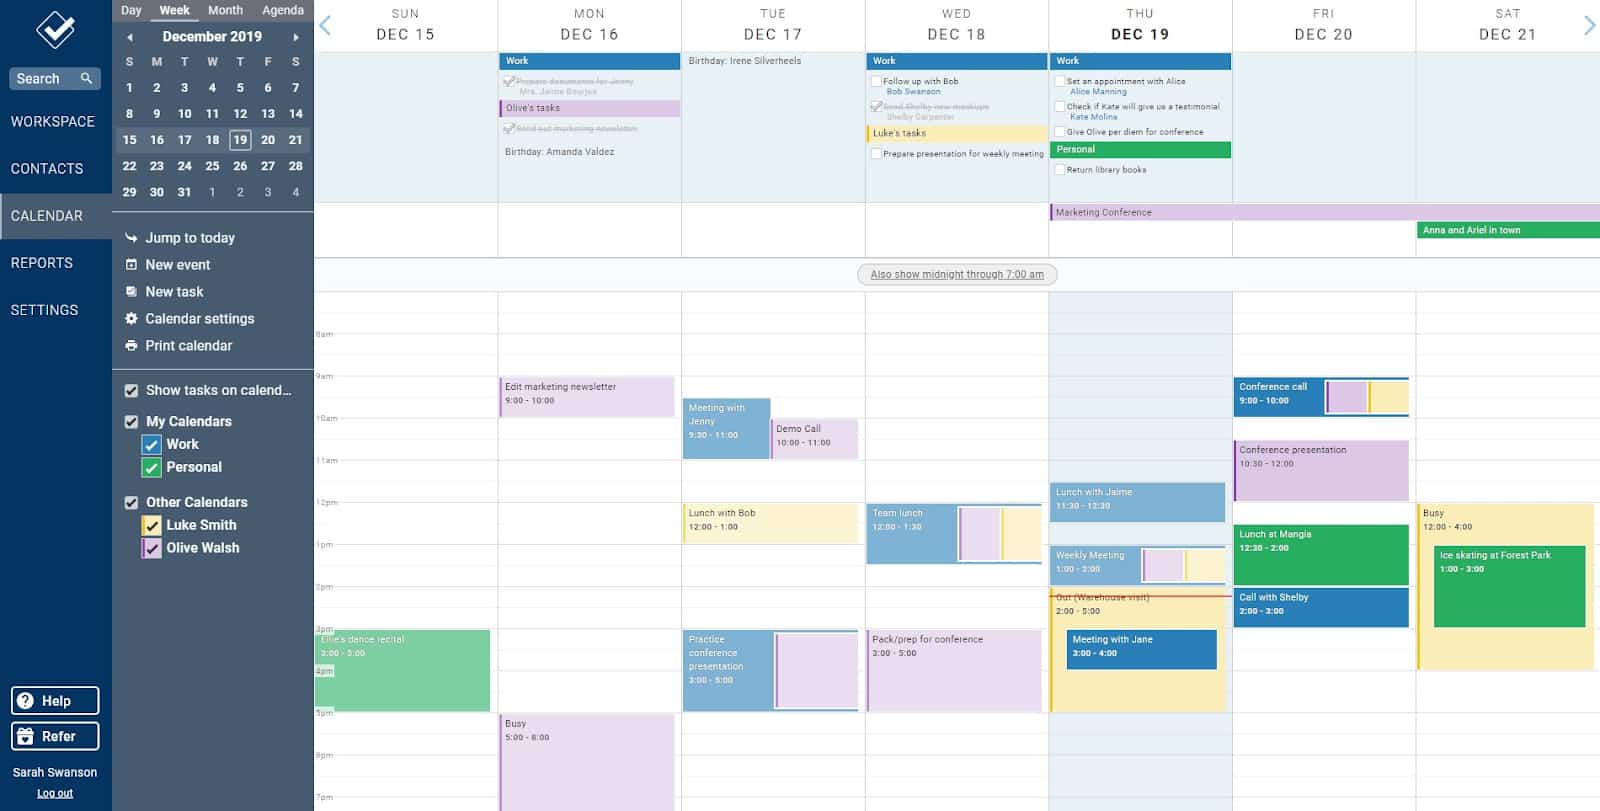 Example shared calendar of Less Annoying CRM’s with scheduled tasks.